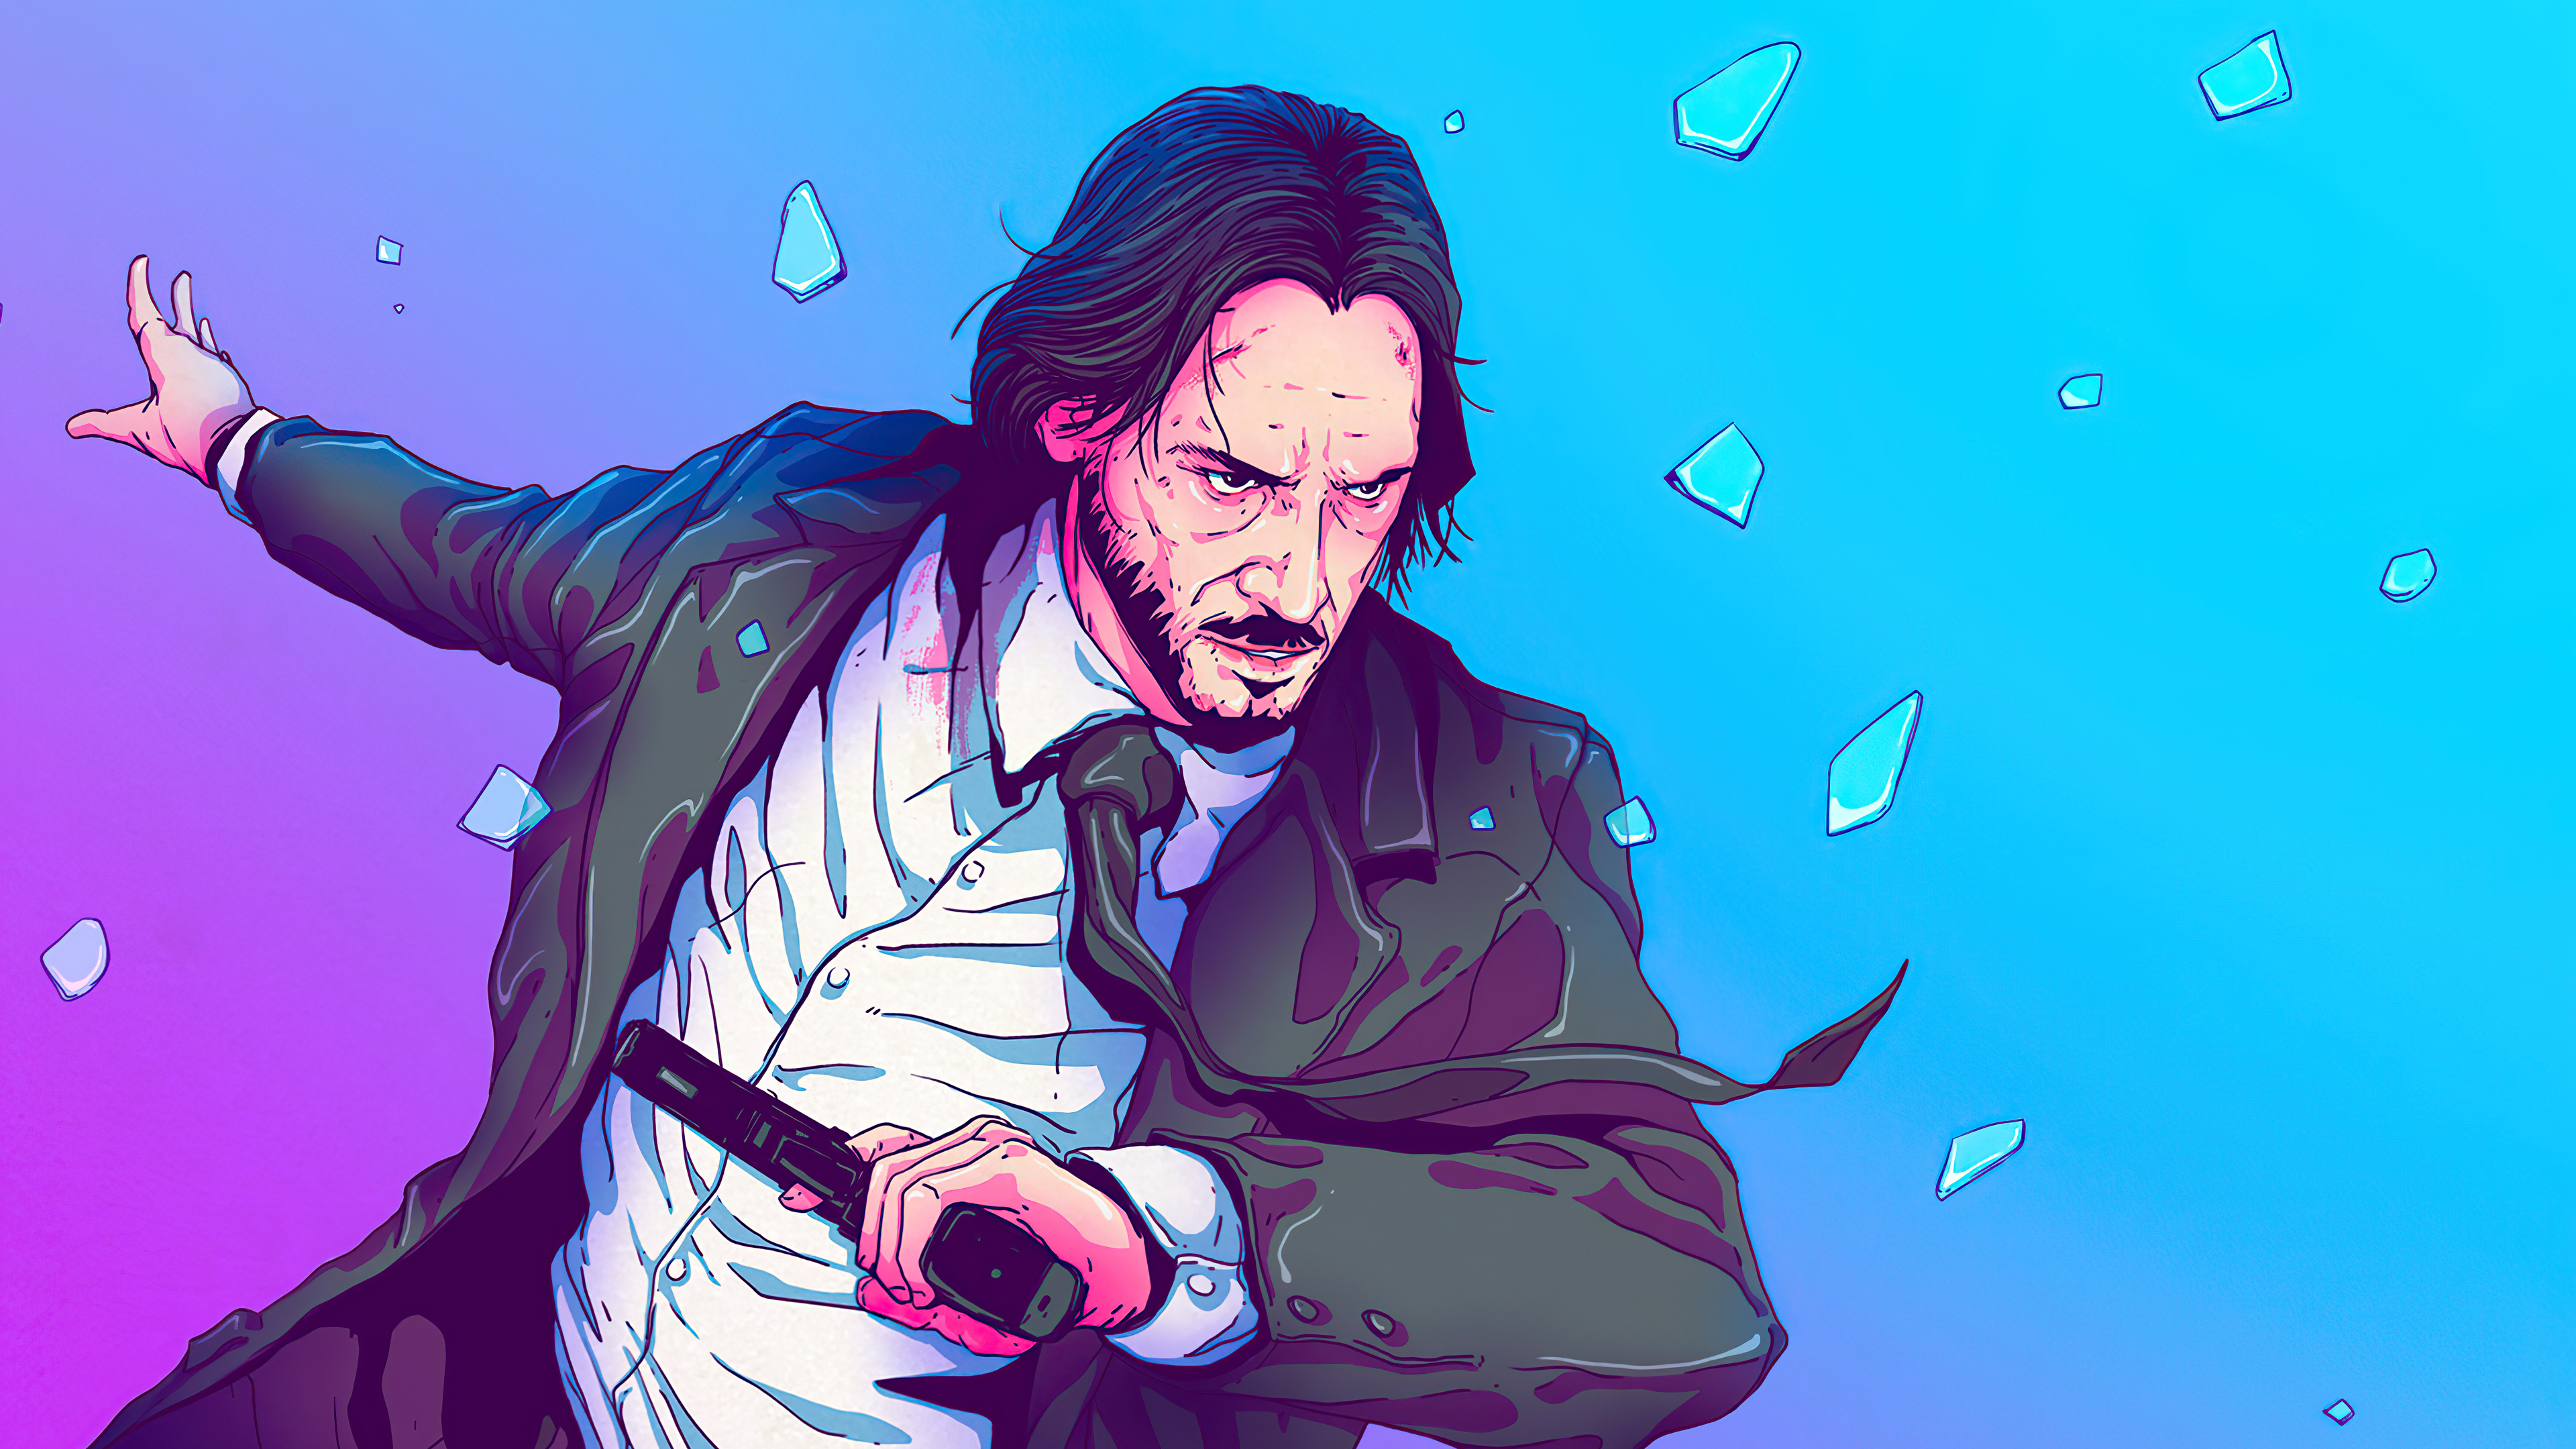 John Wick as Keanu Reeves Illustration Wallpaper, HD Celebrities 4K  Wallpapers, Images, Photos and Background - Wallpapers Den